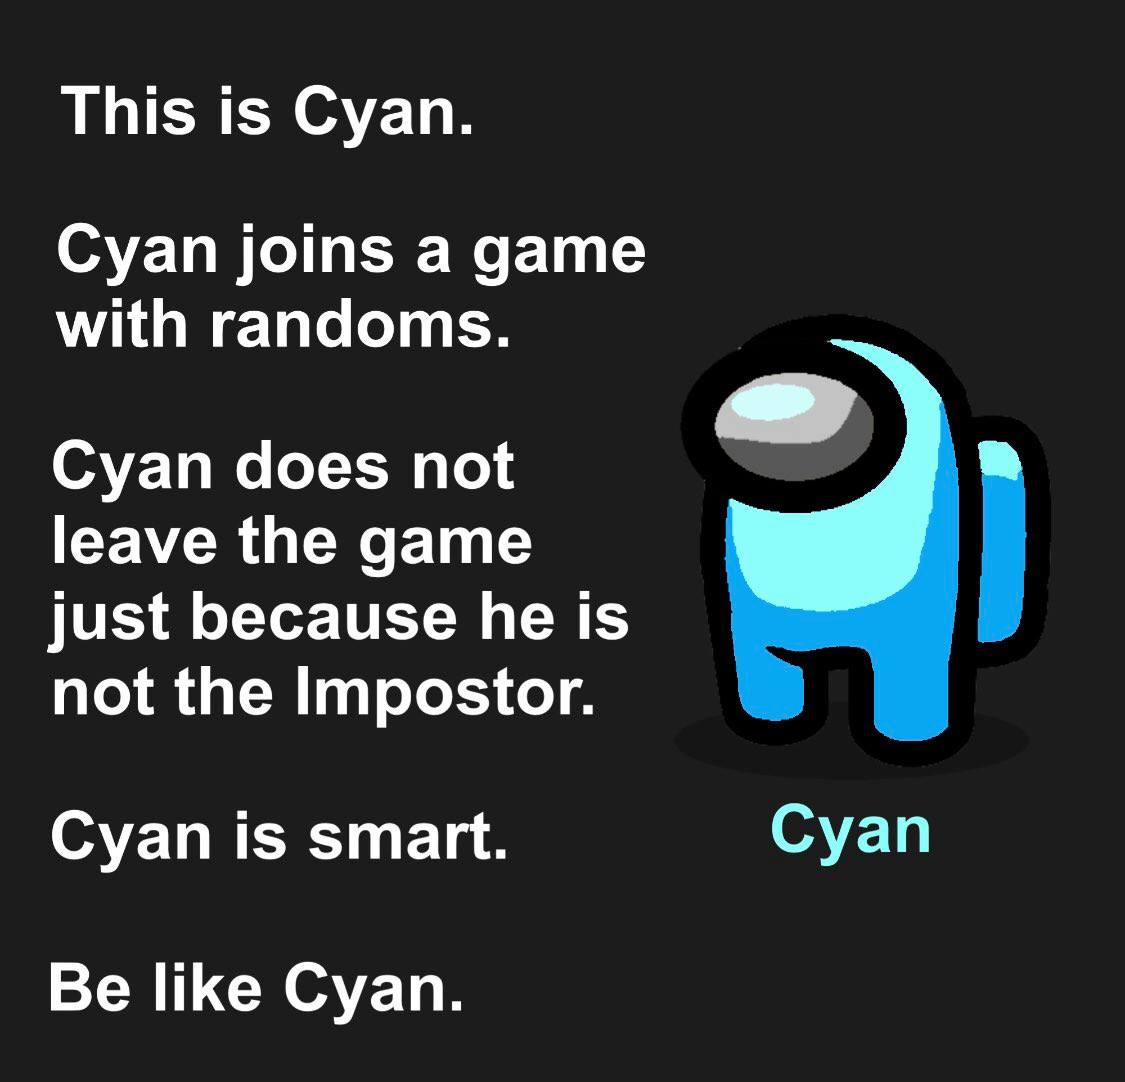 Cyan does not leave the game just because he is not the Impostor. Be